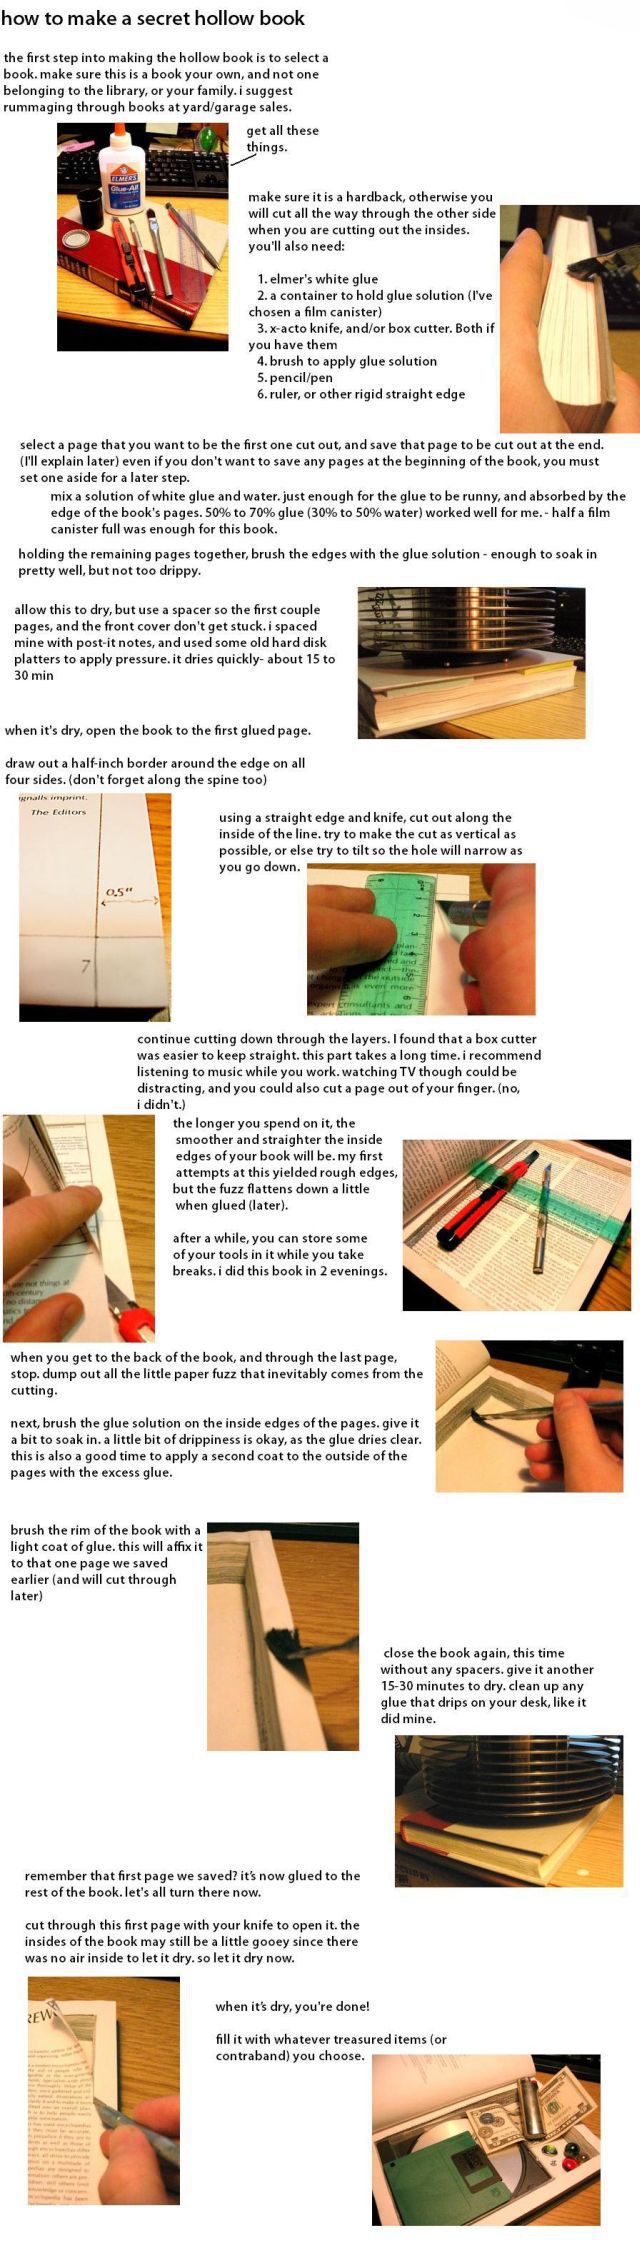 Making a Hollow Book (1 pic)